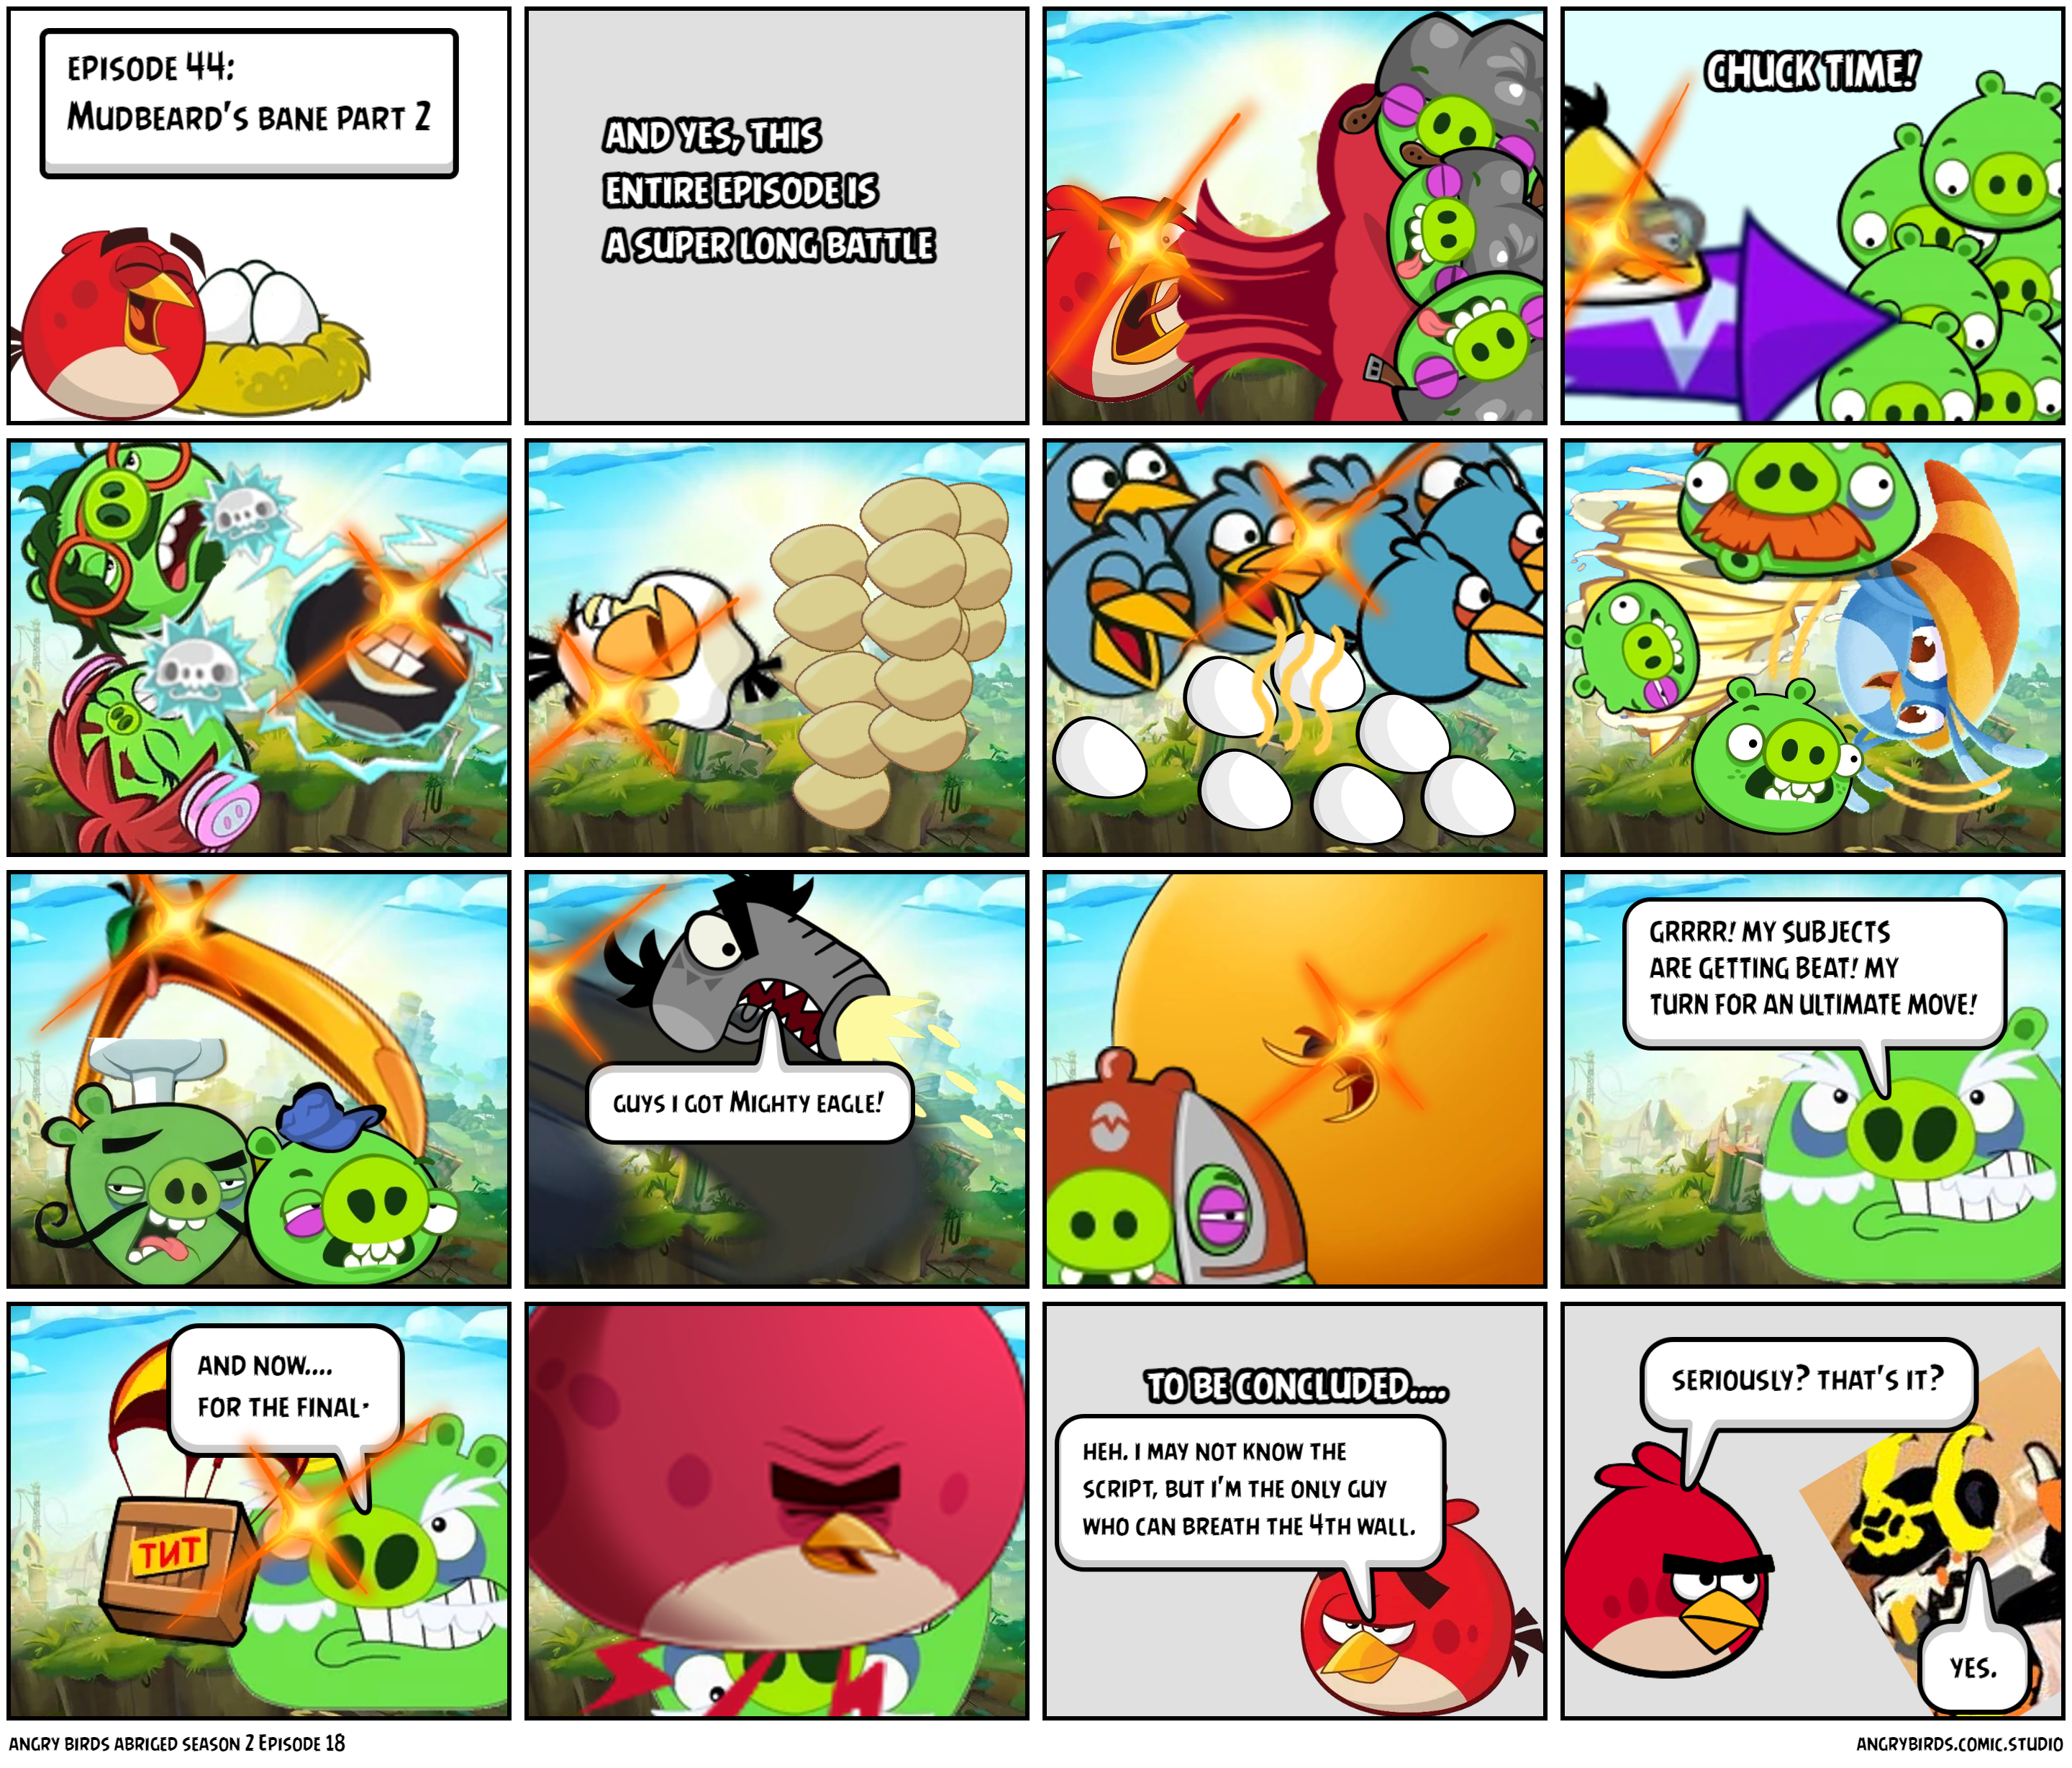 angry birds abriged season 2 Episode 18